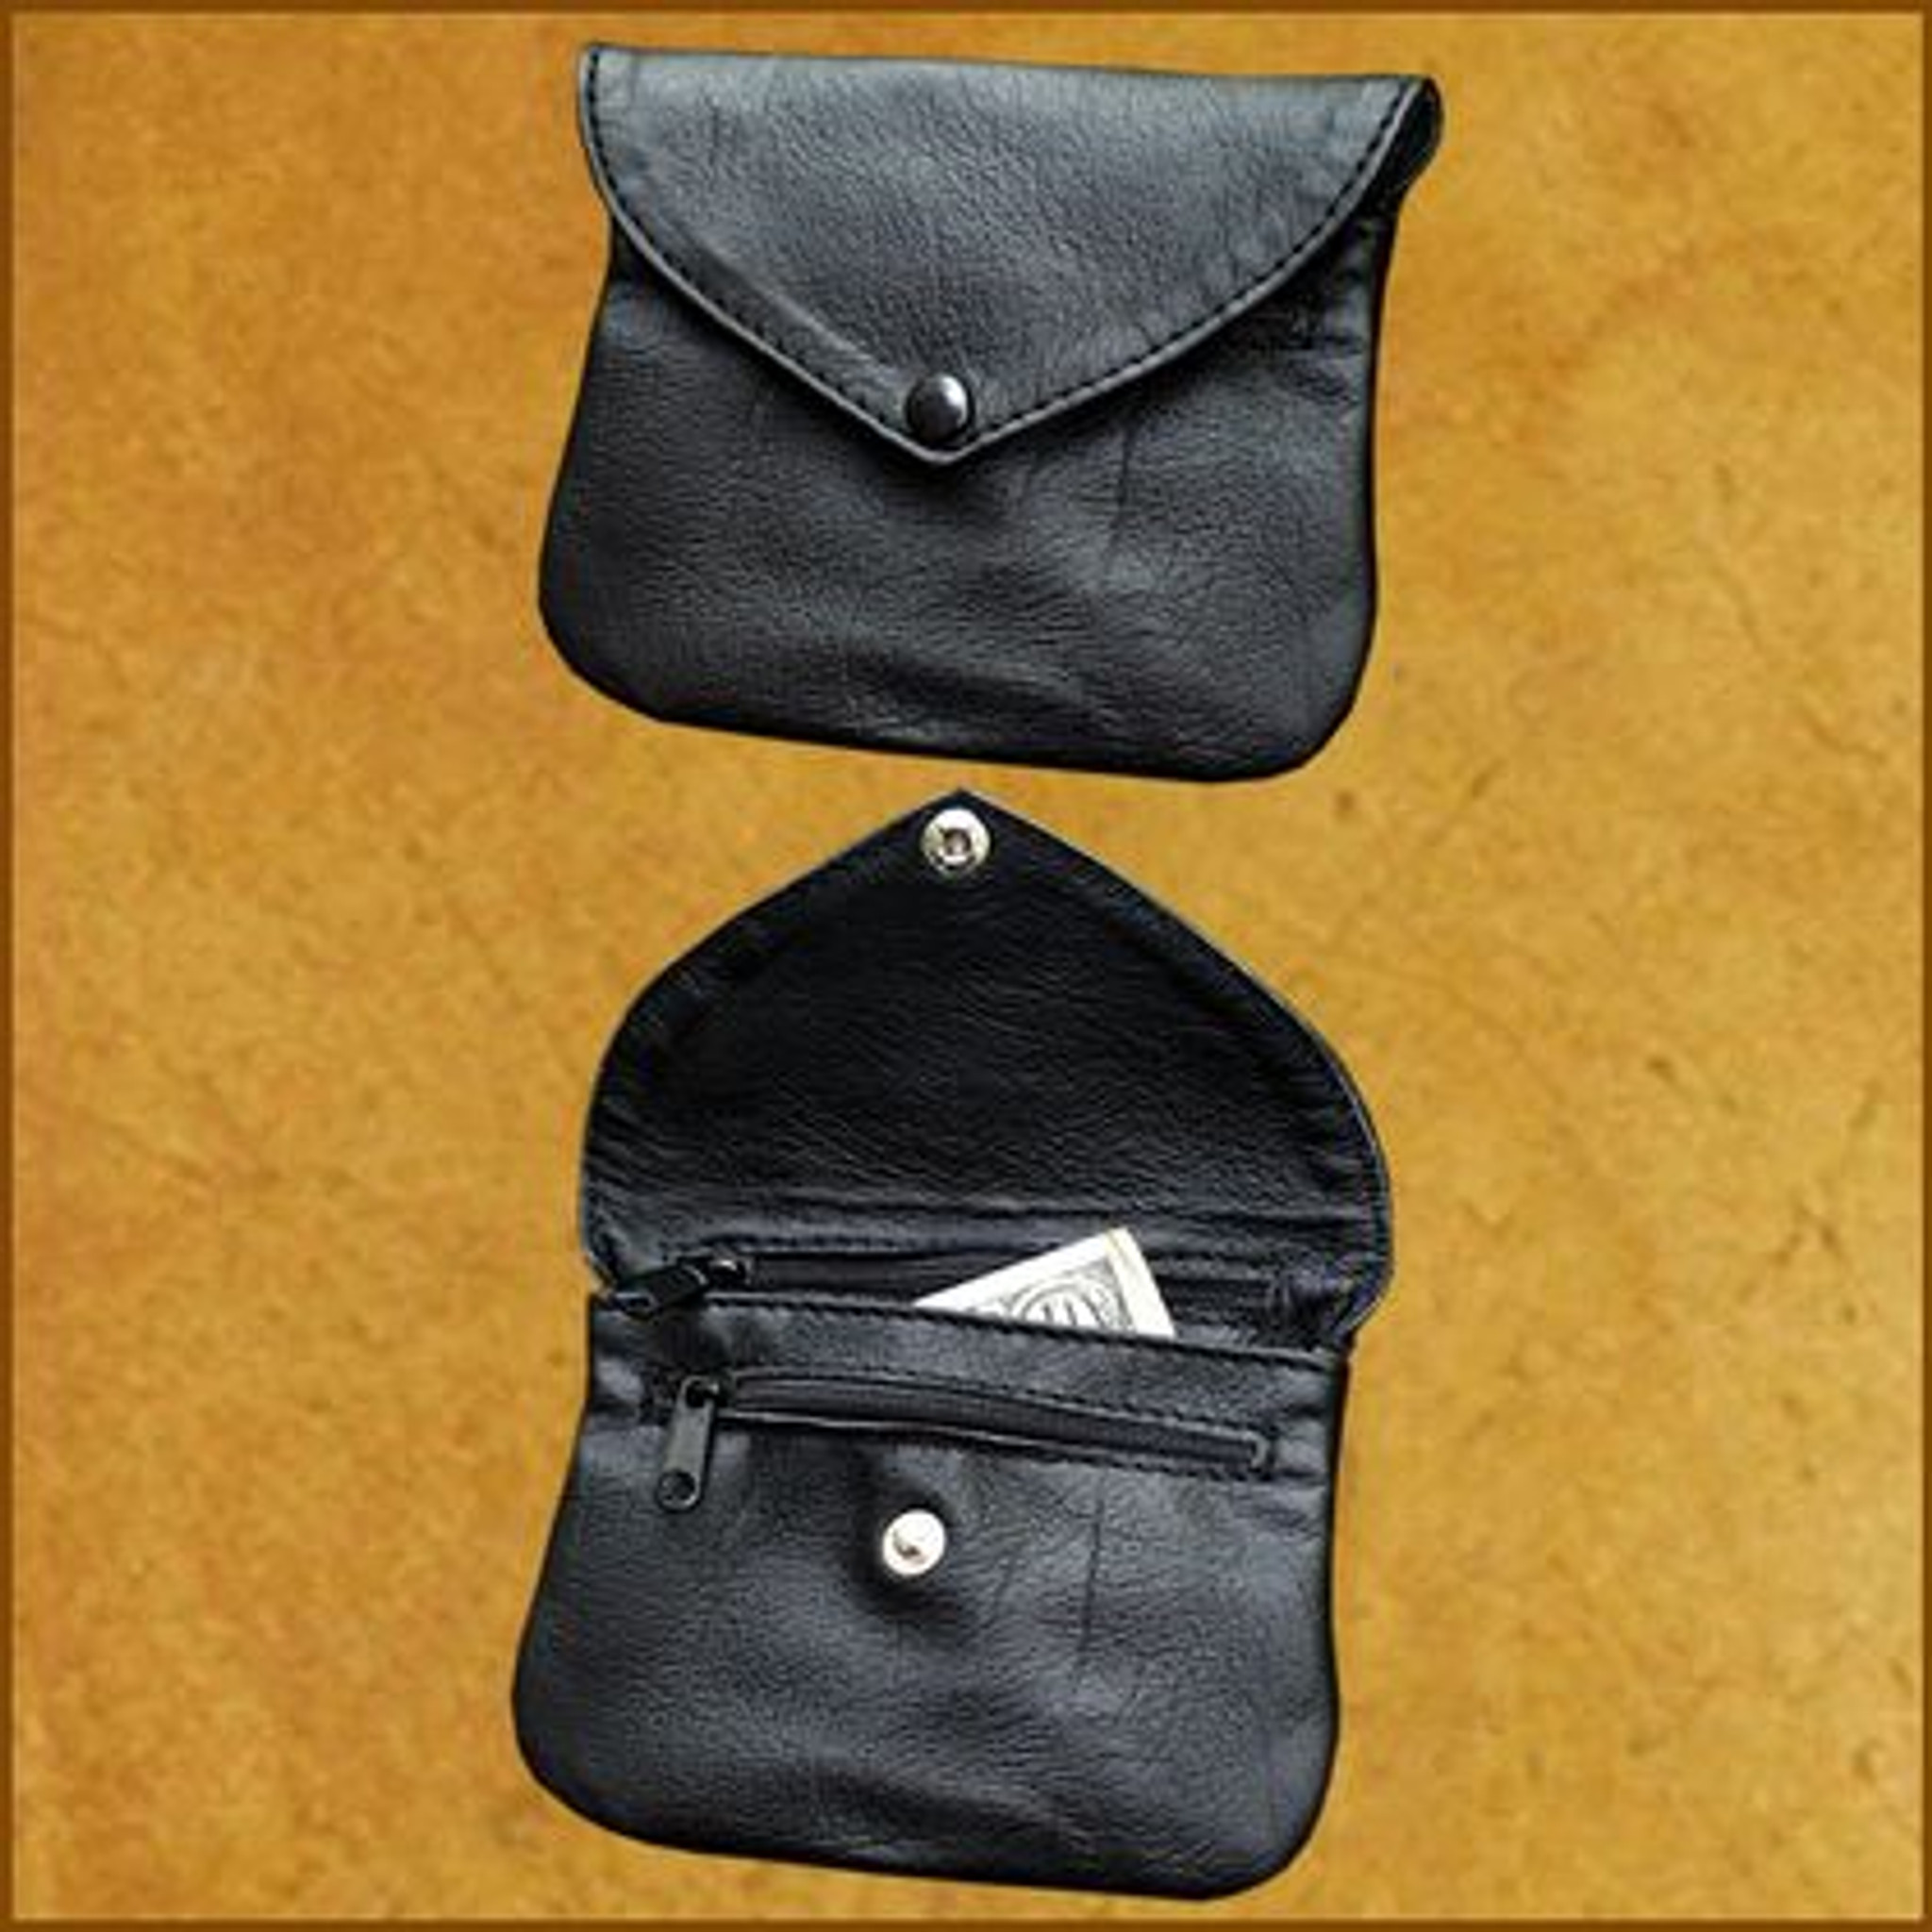 Men's Accessories: Soft leather coin purse